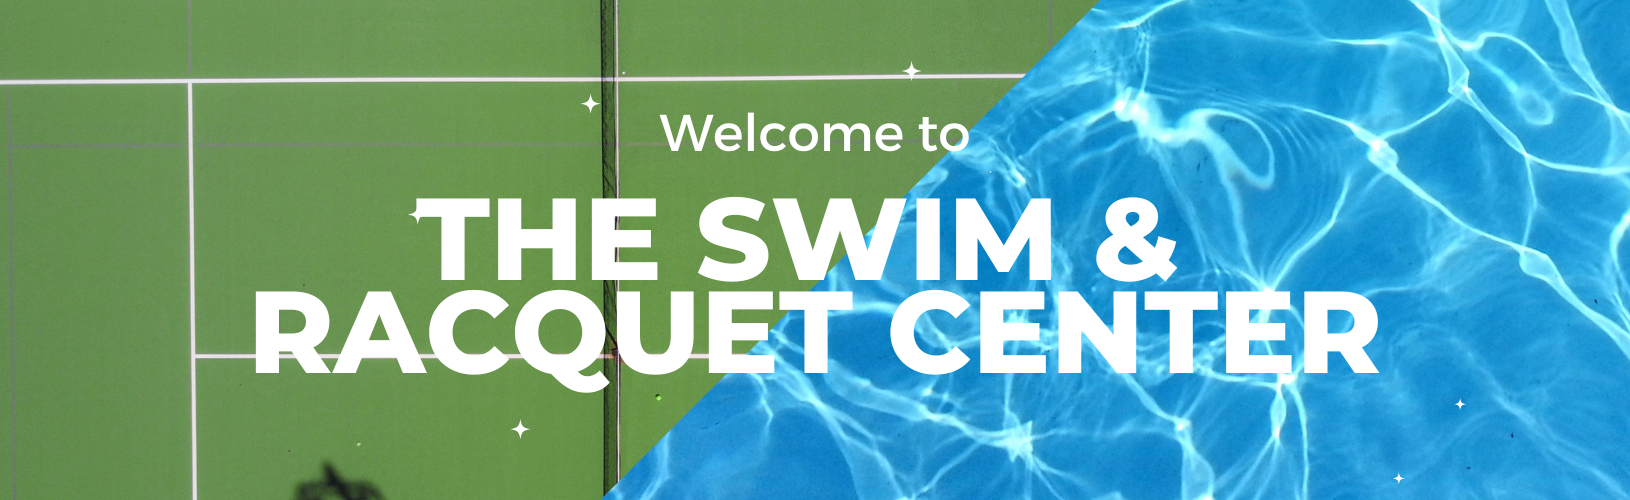 Welcome to The Swim & Racquet Center